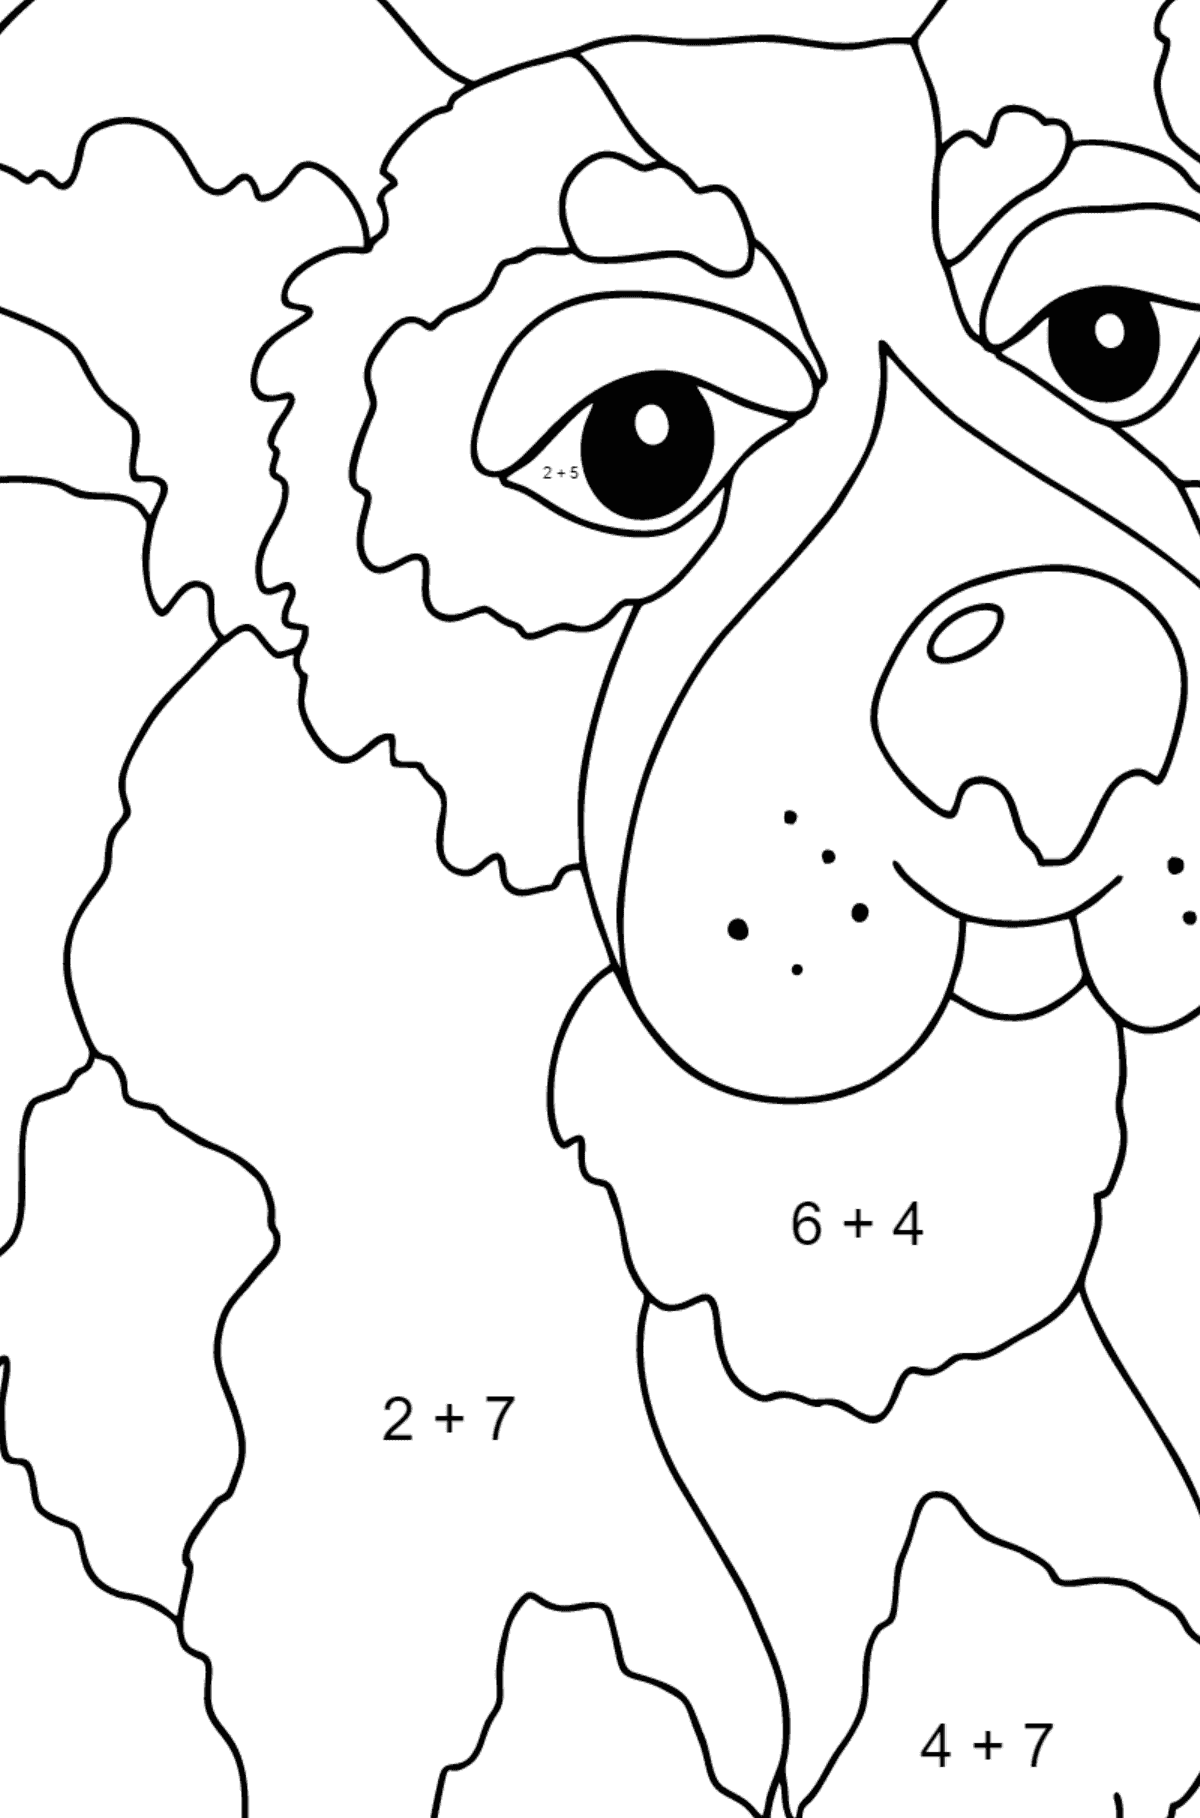 Coloring Page - A Dog is Jumping with a Blue Ball for Children  - Color by Number Addition